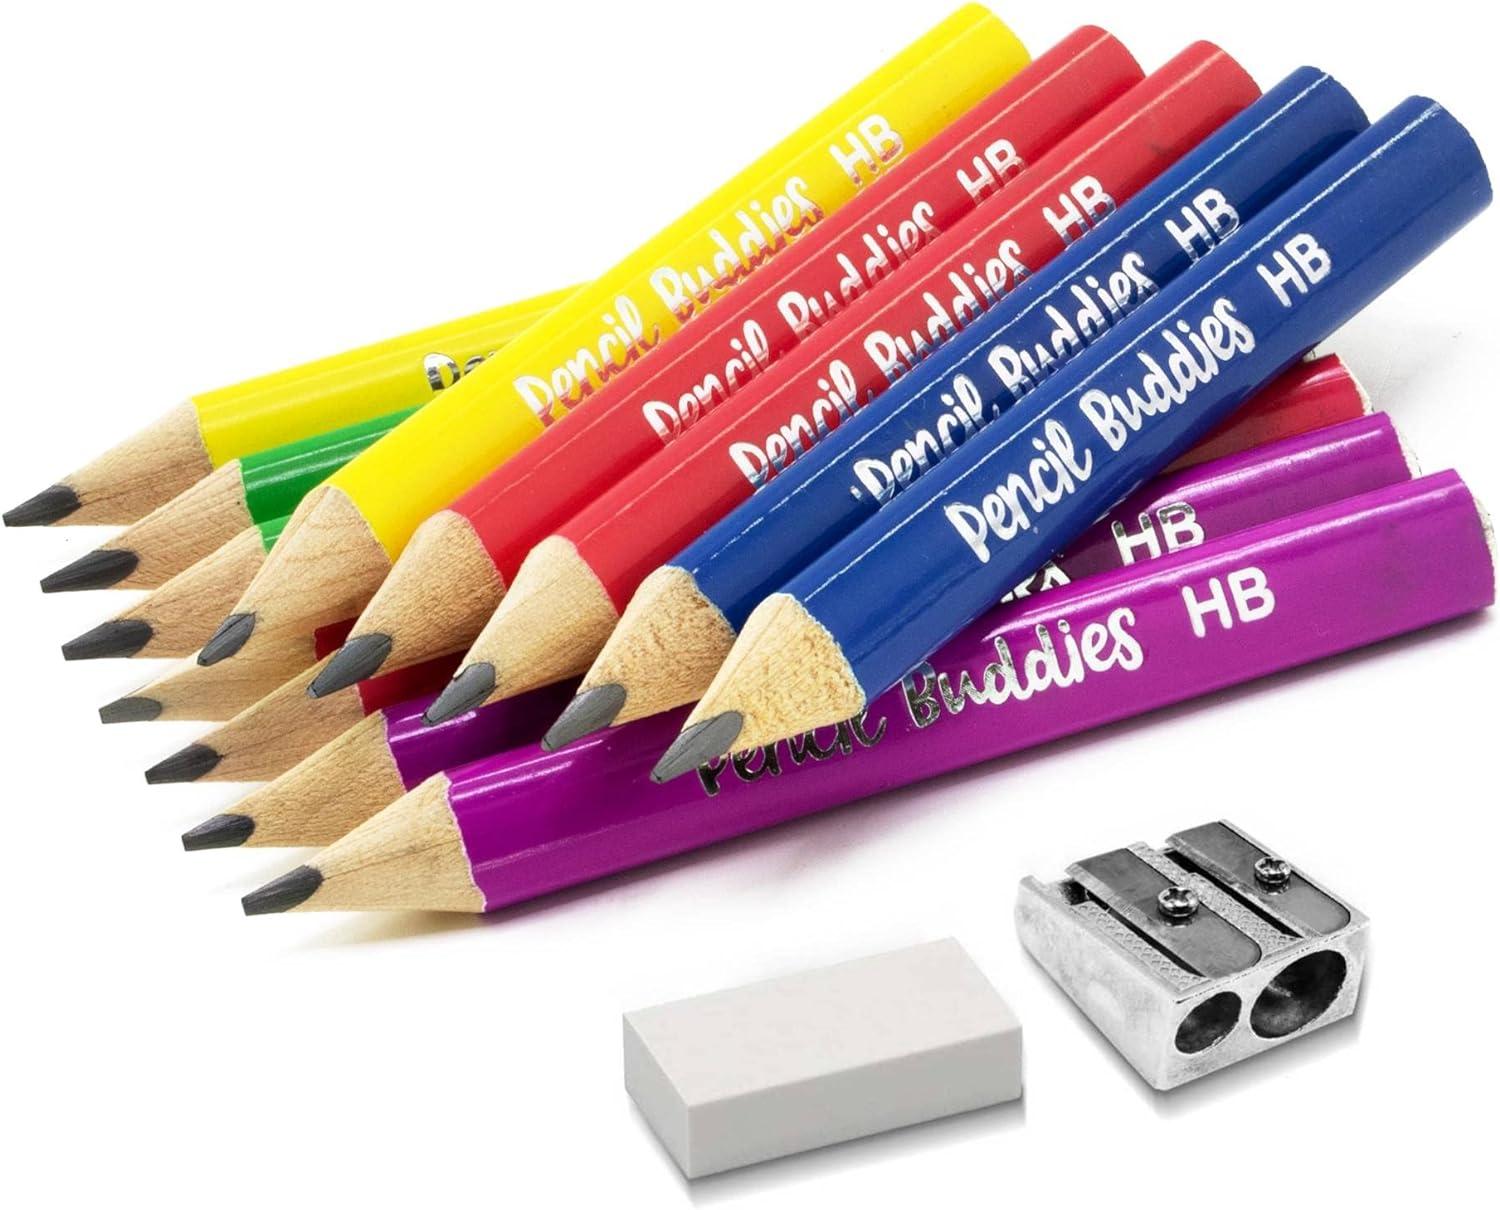 short fat kids pencils - 12 pencils with thick triangle shape for preschoolers kindergarten toddlers and